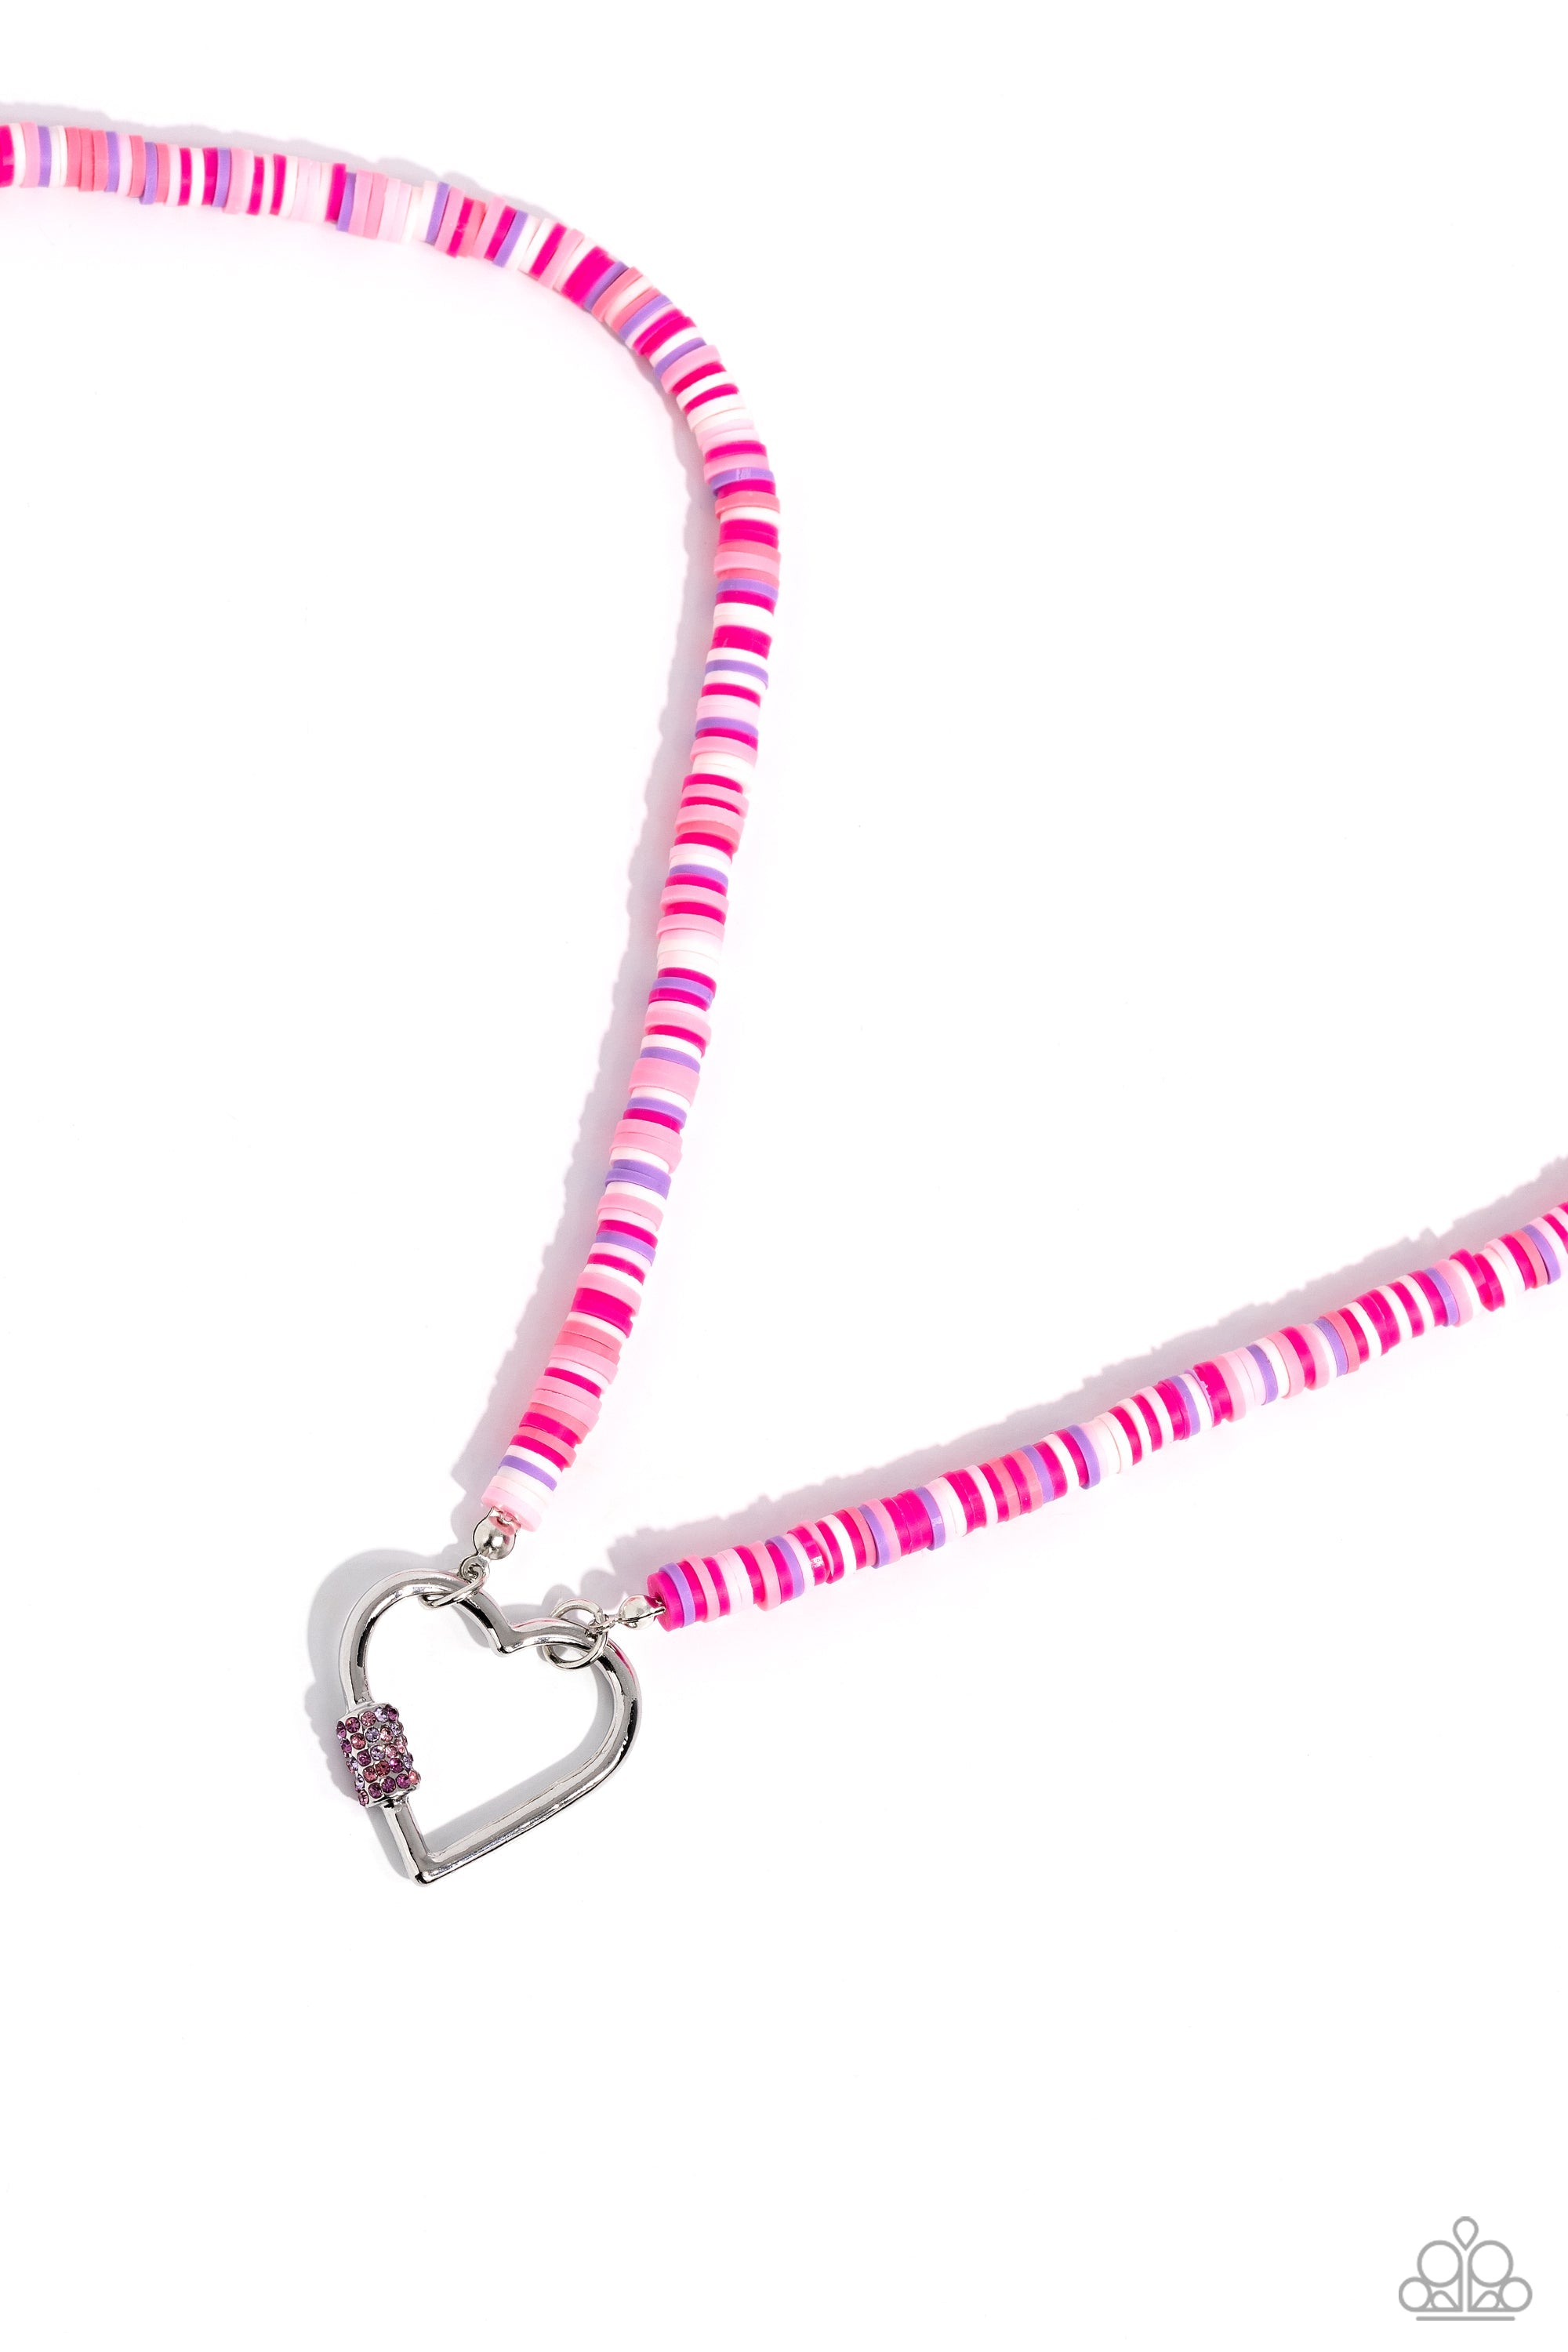 Clearly Carabiner Pink Heart Necklace - Paparazzi Accessories- lightbox - CarasShop.com - $5 Jewelry by Cara Jewels